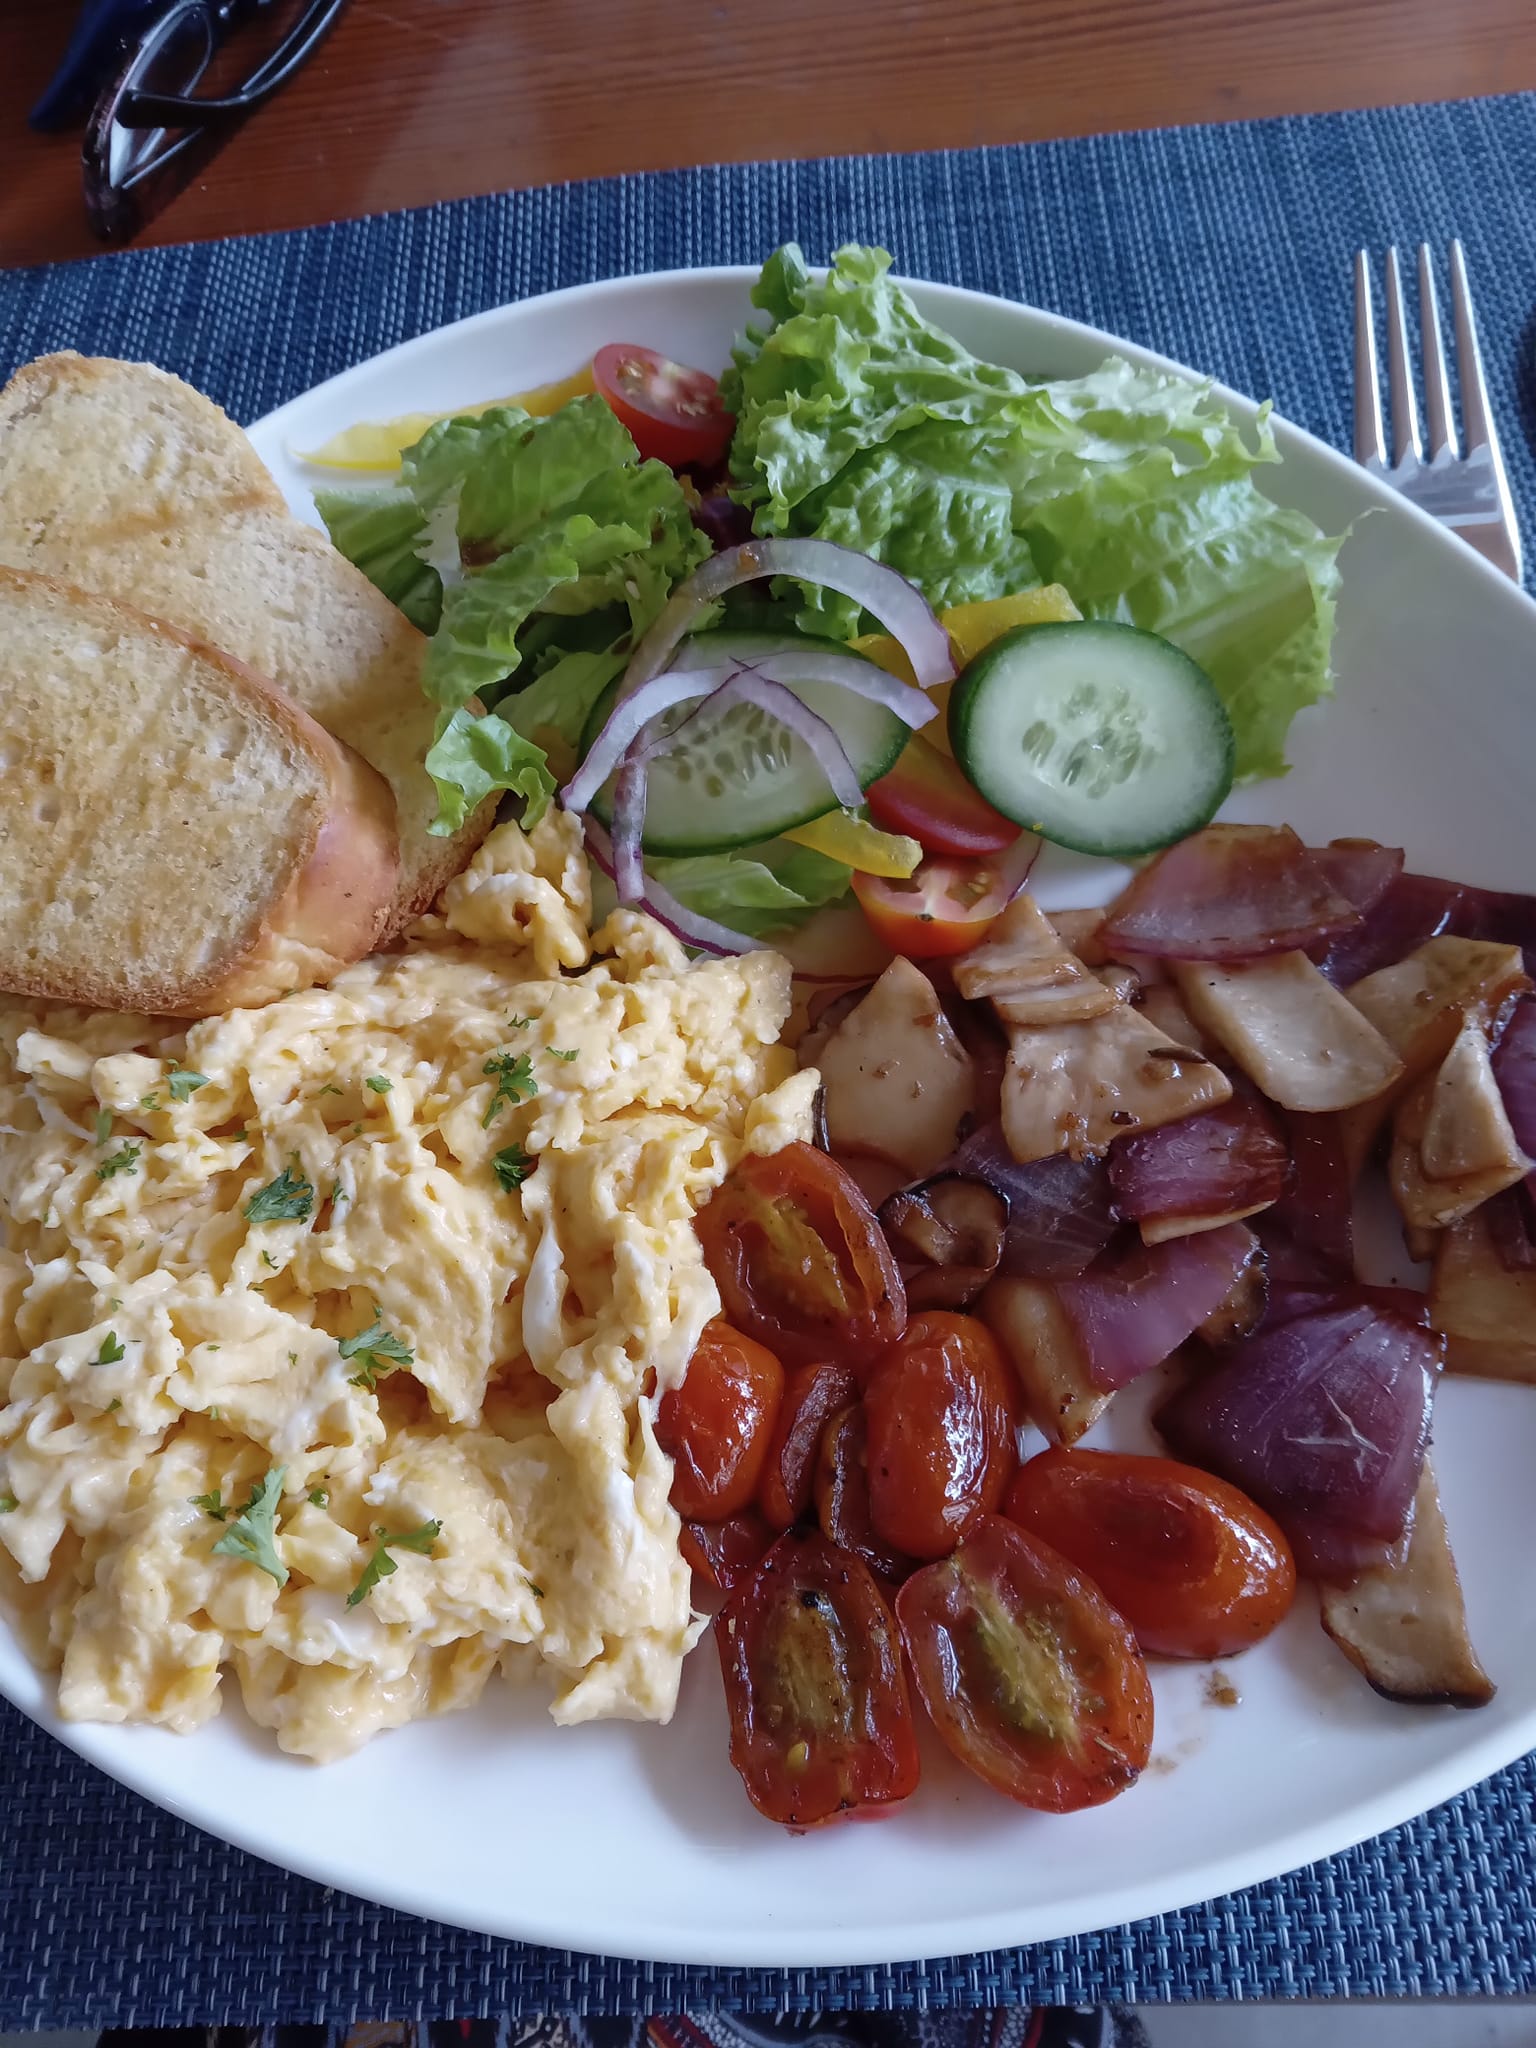 A plate of North American style breakfast of scrambled eggs, tomatoes, green salad and toast